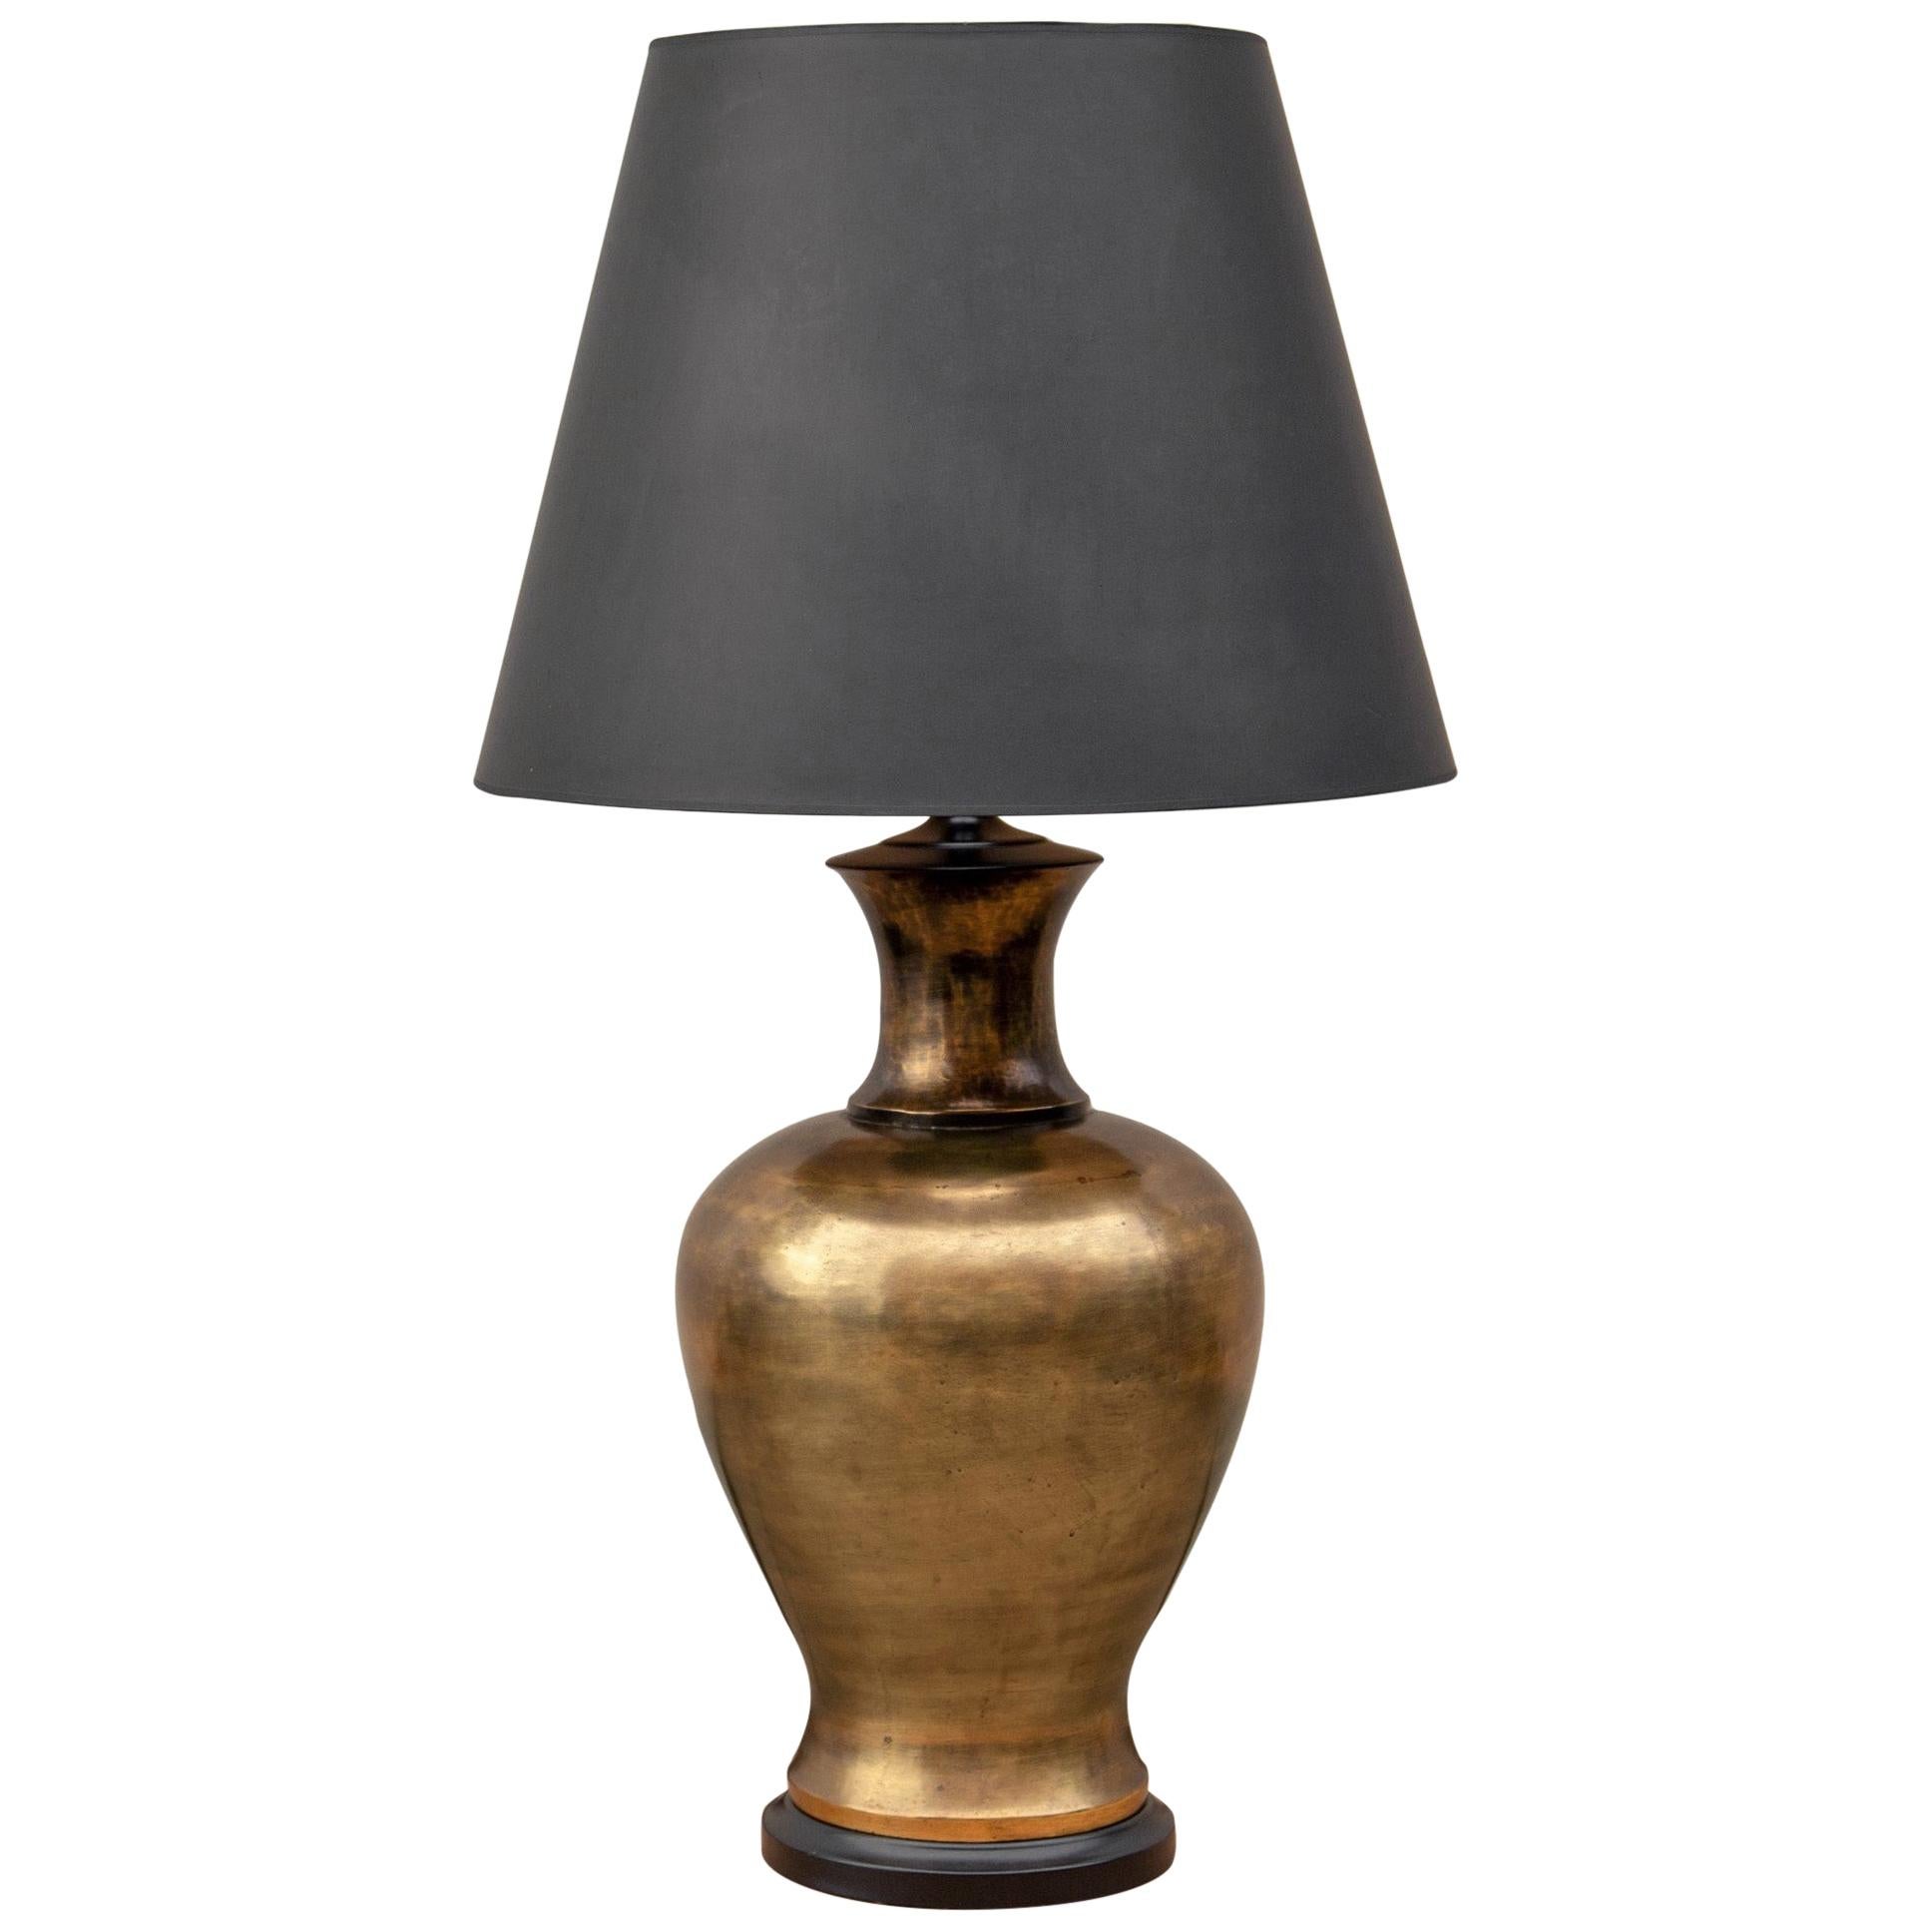 Large Brass Urn Lamp with Black Shade by Tyndale